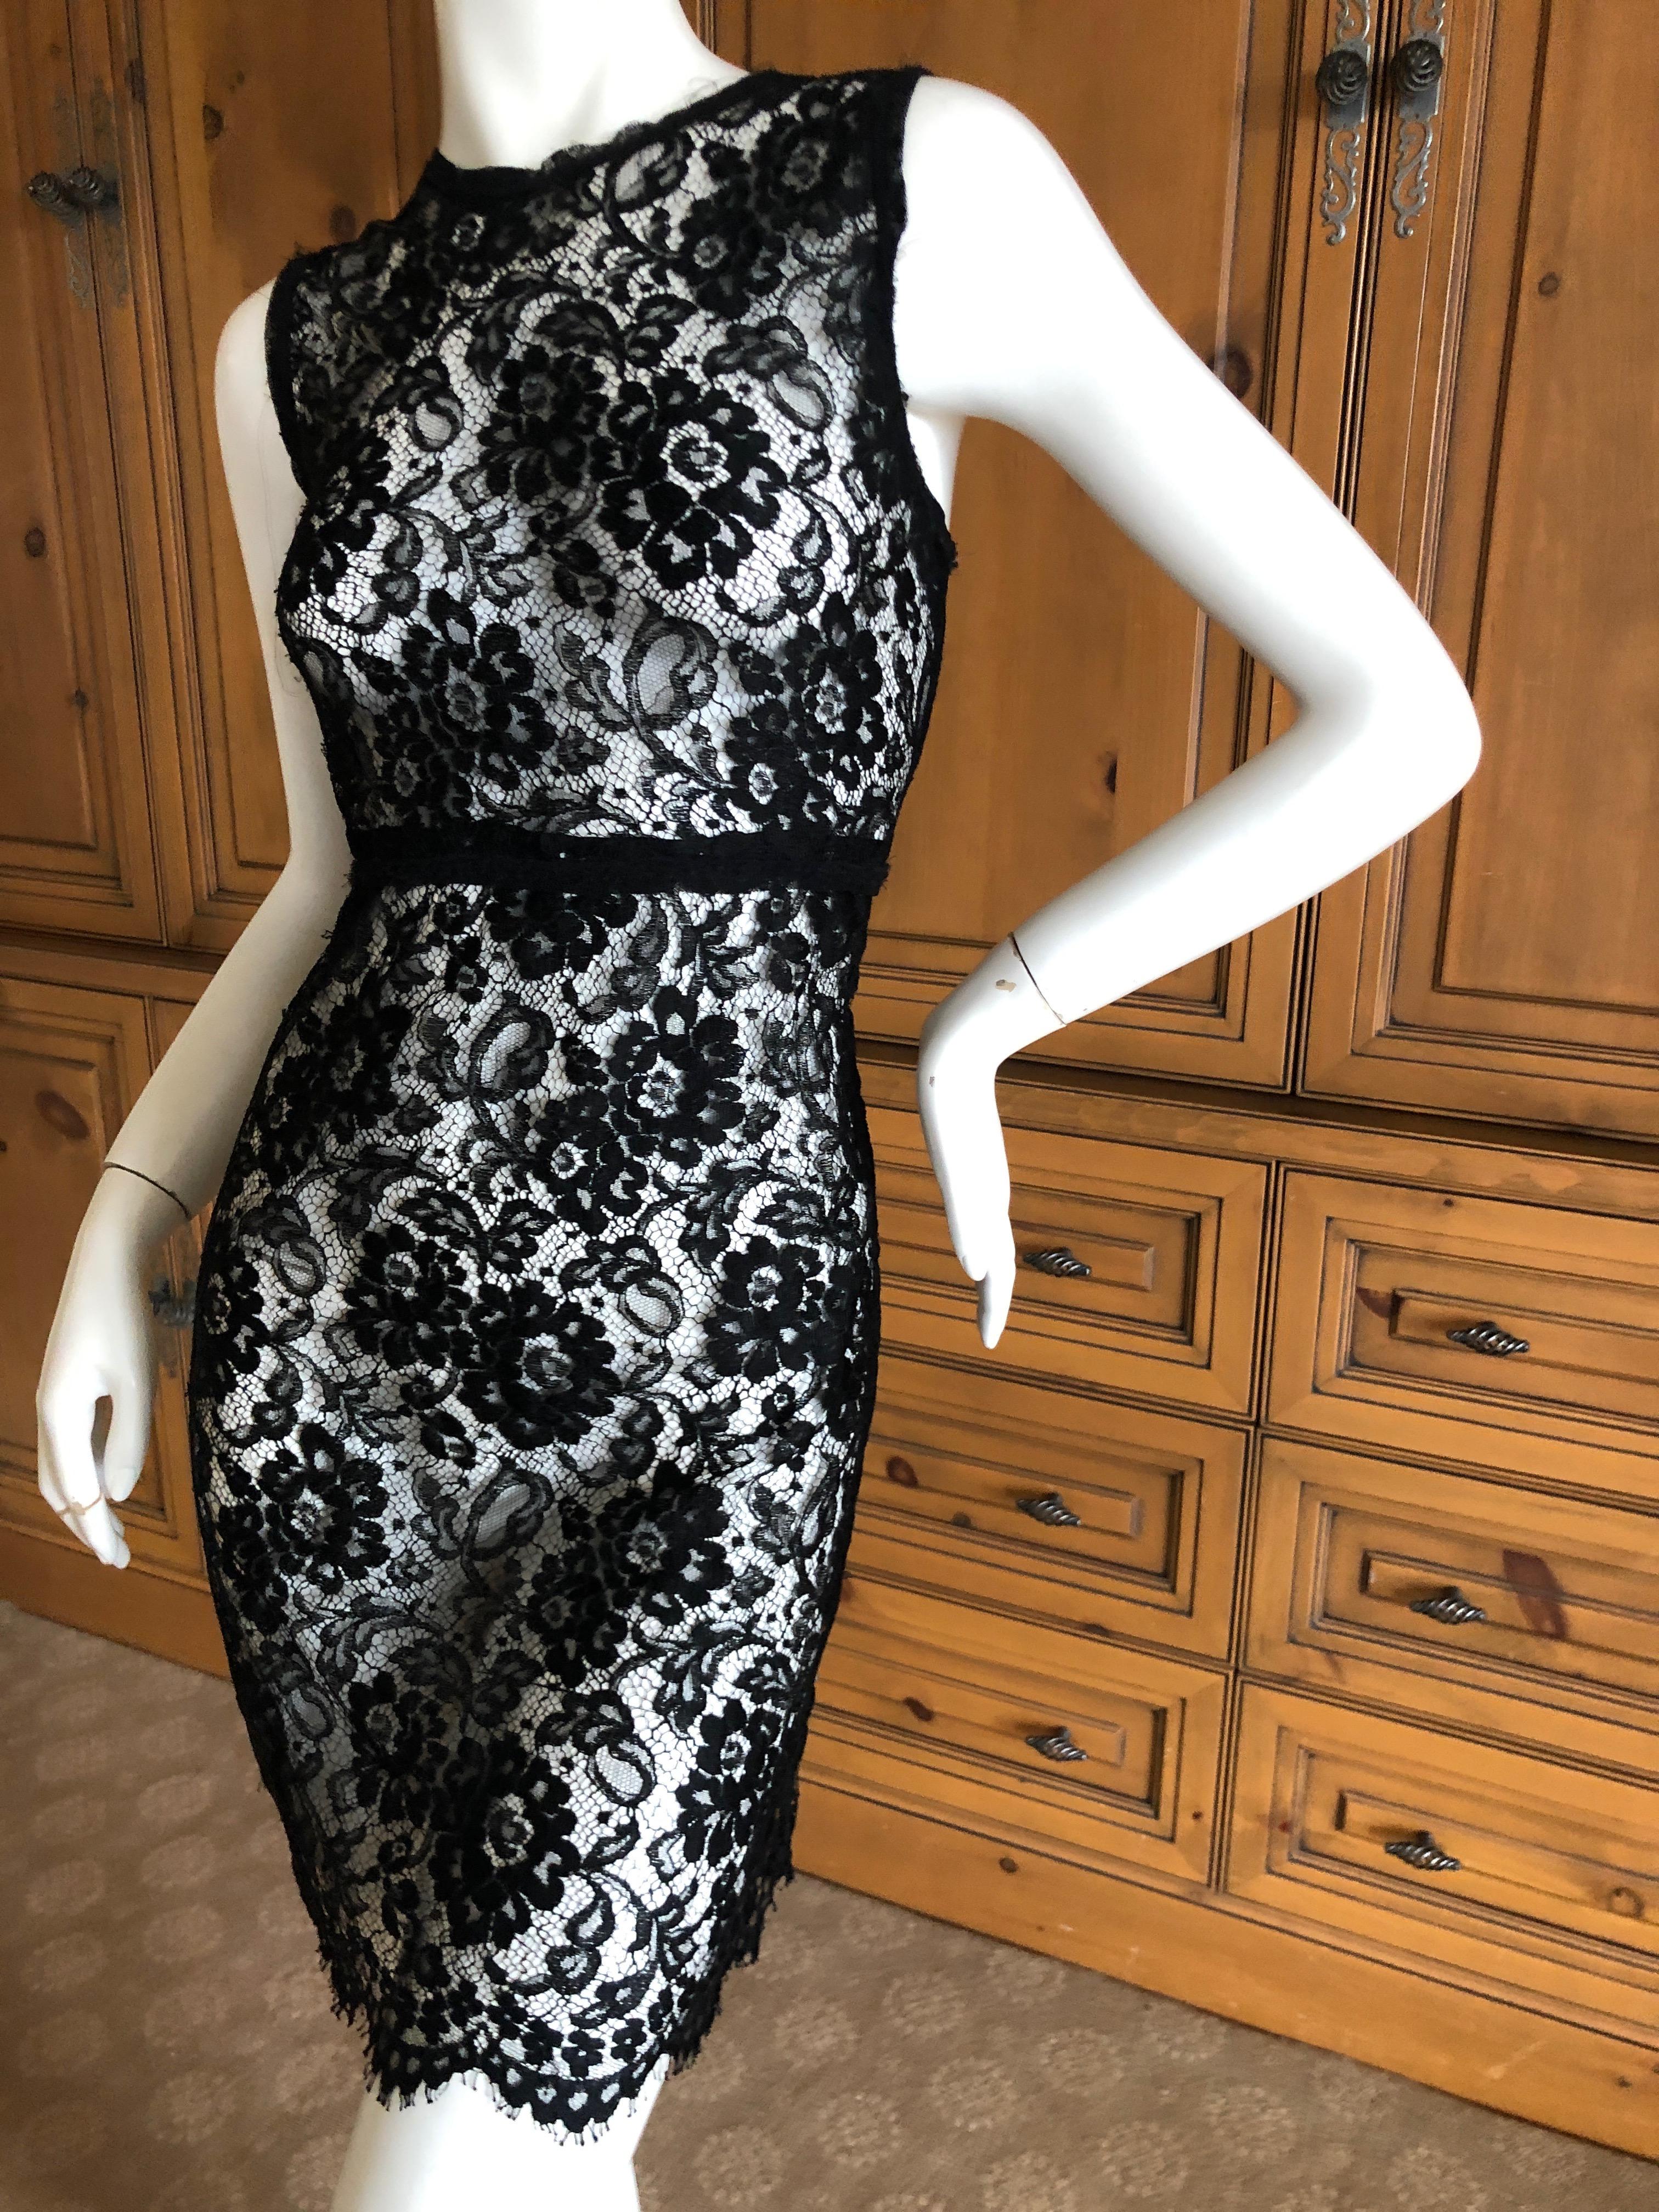 D&G Dolce & Gabbana Vintage Sheer Lace Mini Dress
Please check measurements, there is no size label.
This might have originally had a slip, but it is not with it .
Bust 38